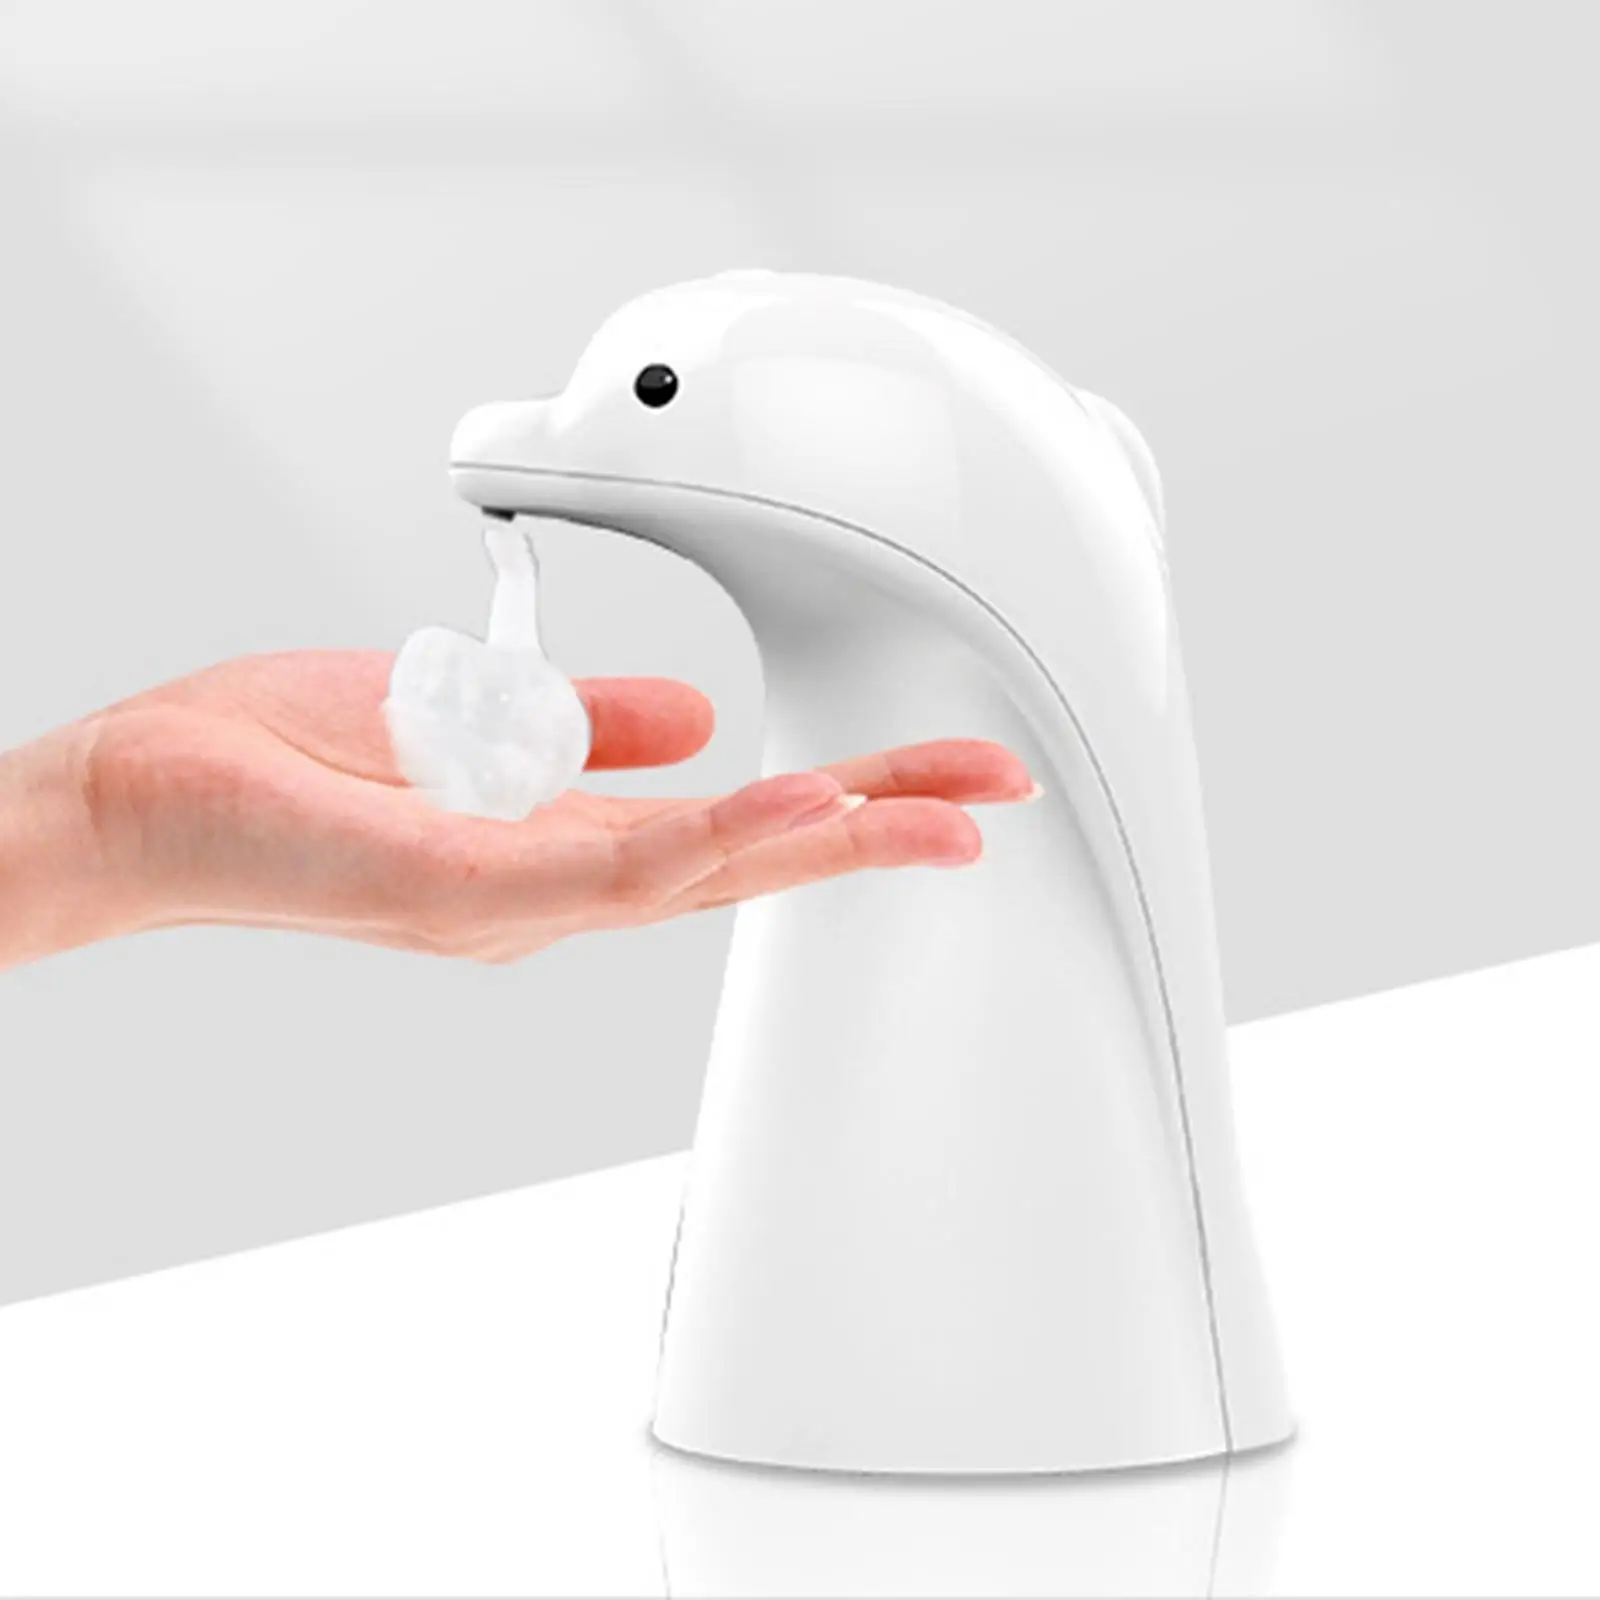 Automatic Soap Dispenser, Touchless Dish Soap Liquid  Dispenser for bathroom and kitchen Commercial, 2 Levels Volume Control